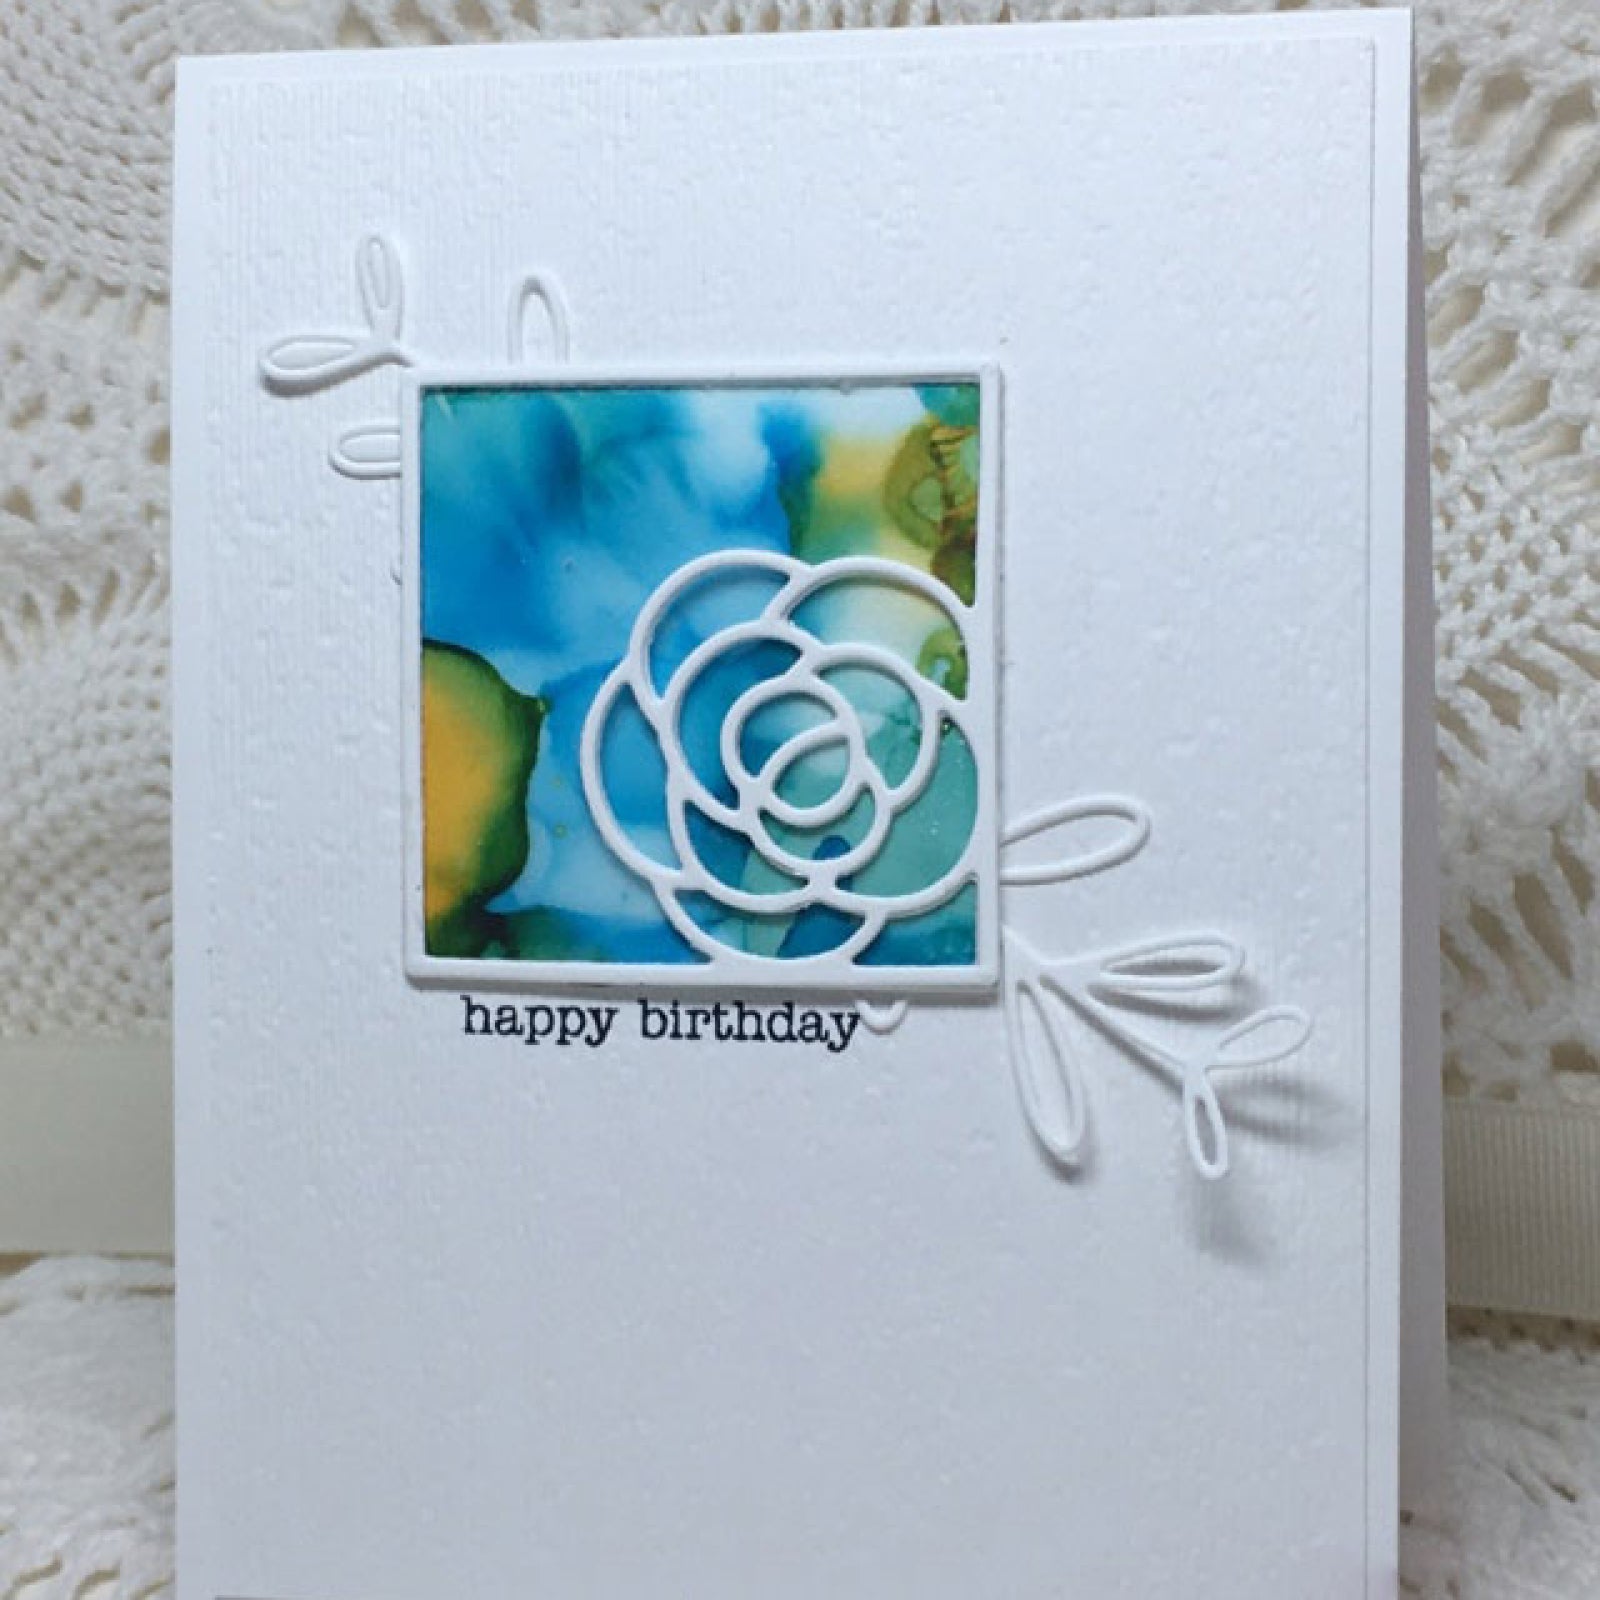 Square Framed Flowers Cutting Dies